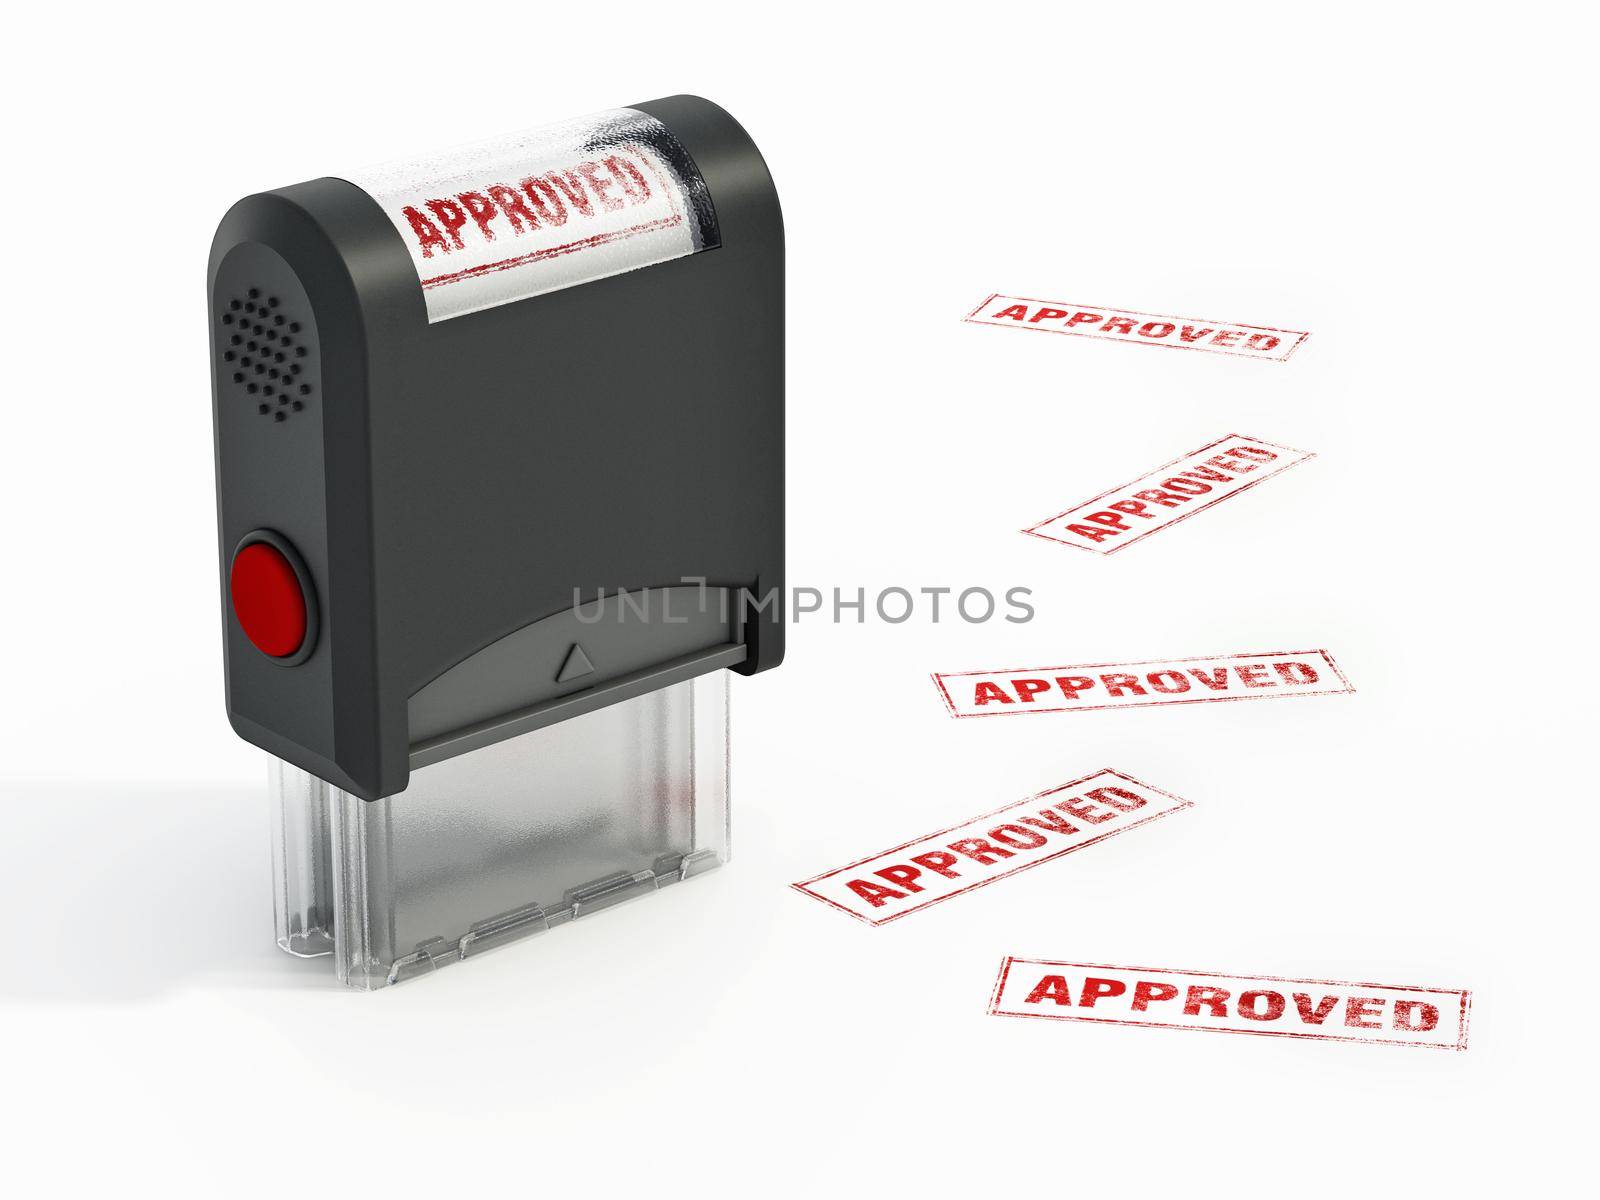 Rubber stamp with approved seal. 3D illustration.